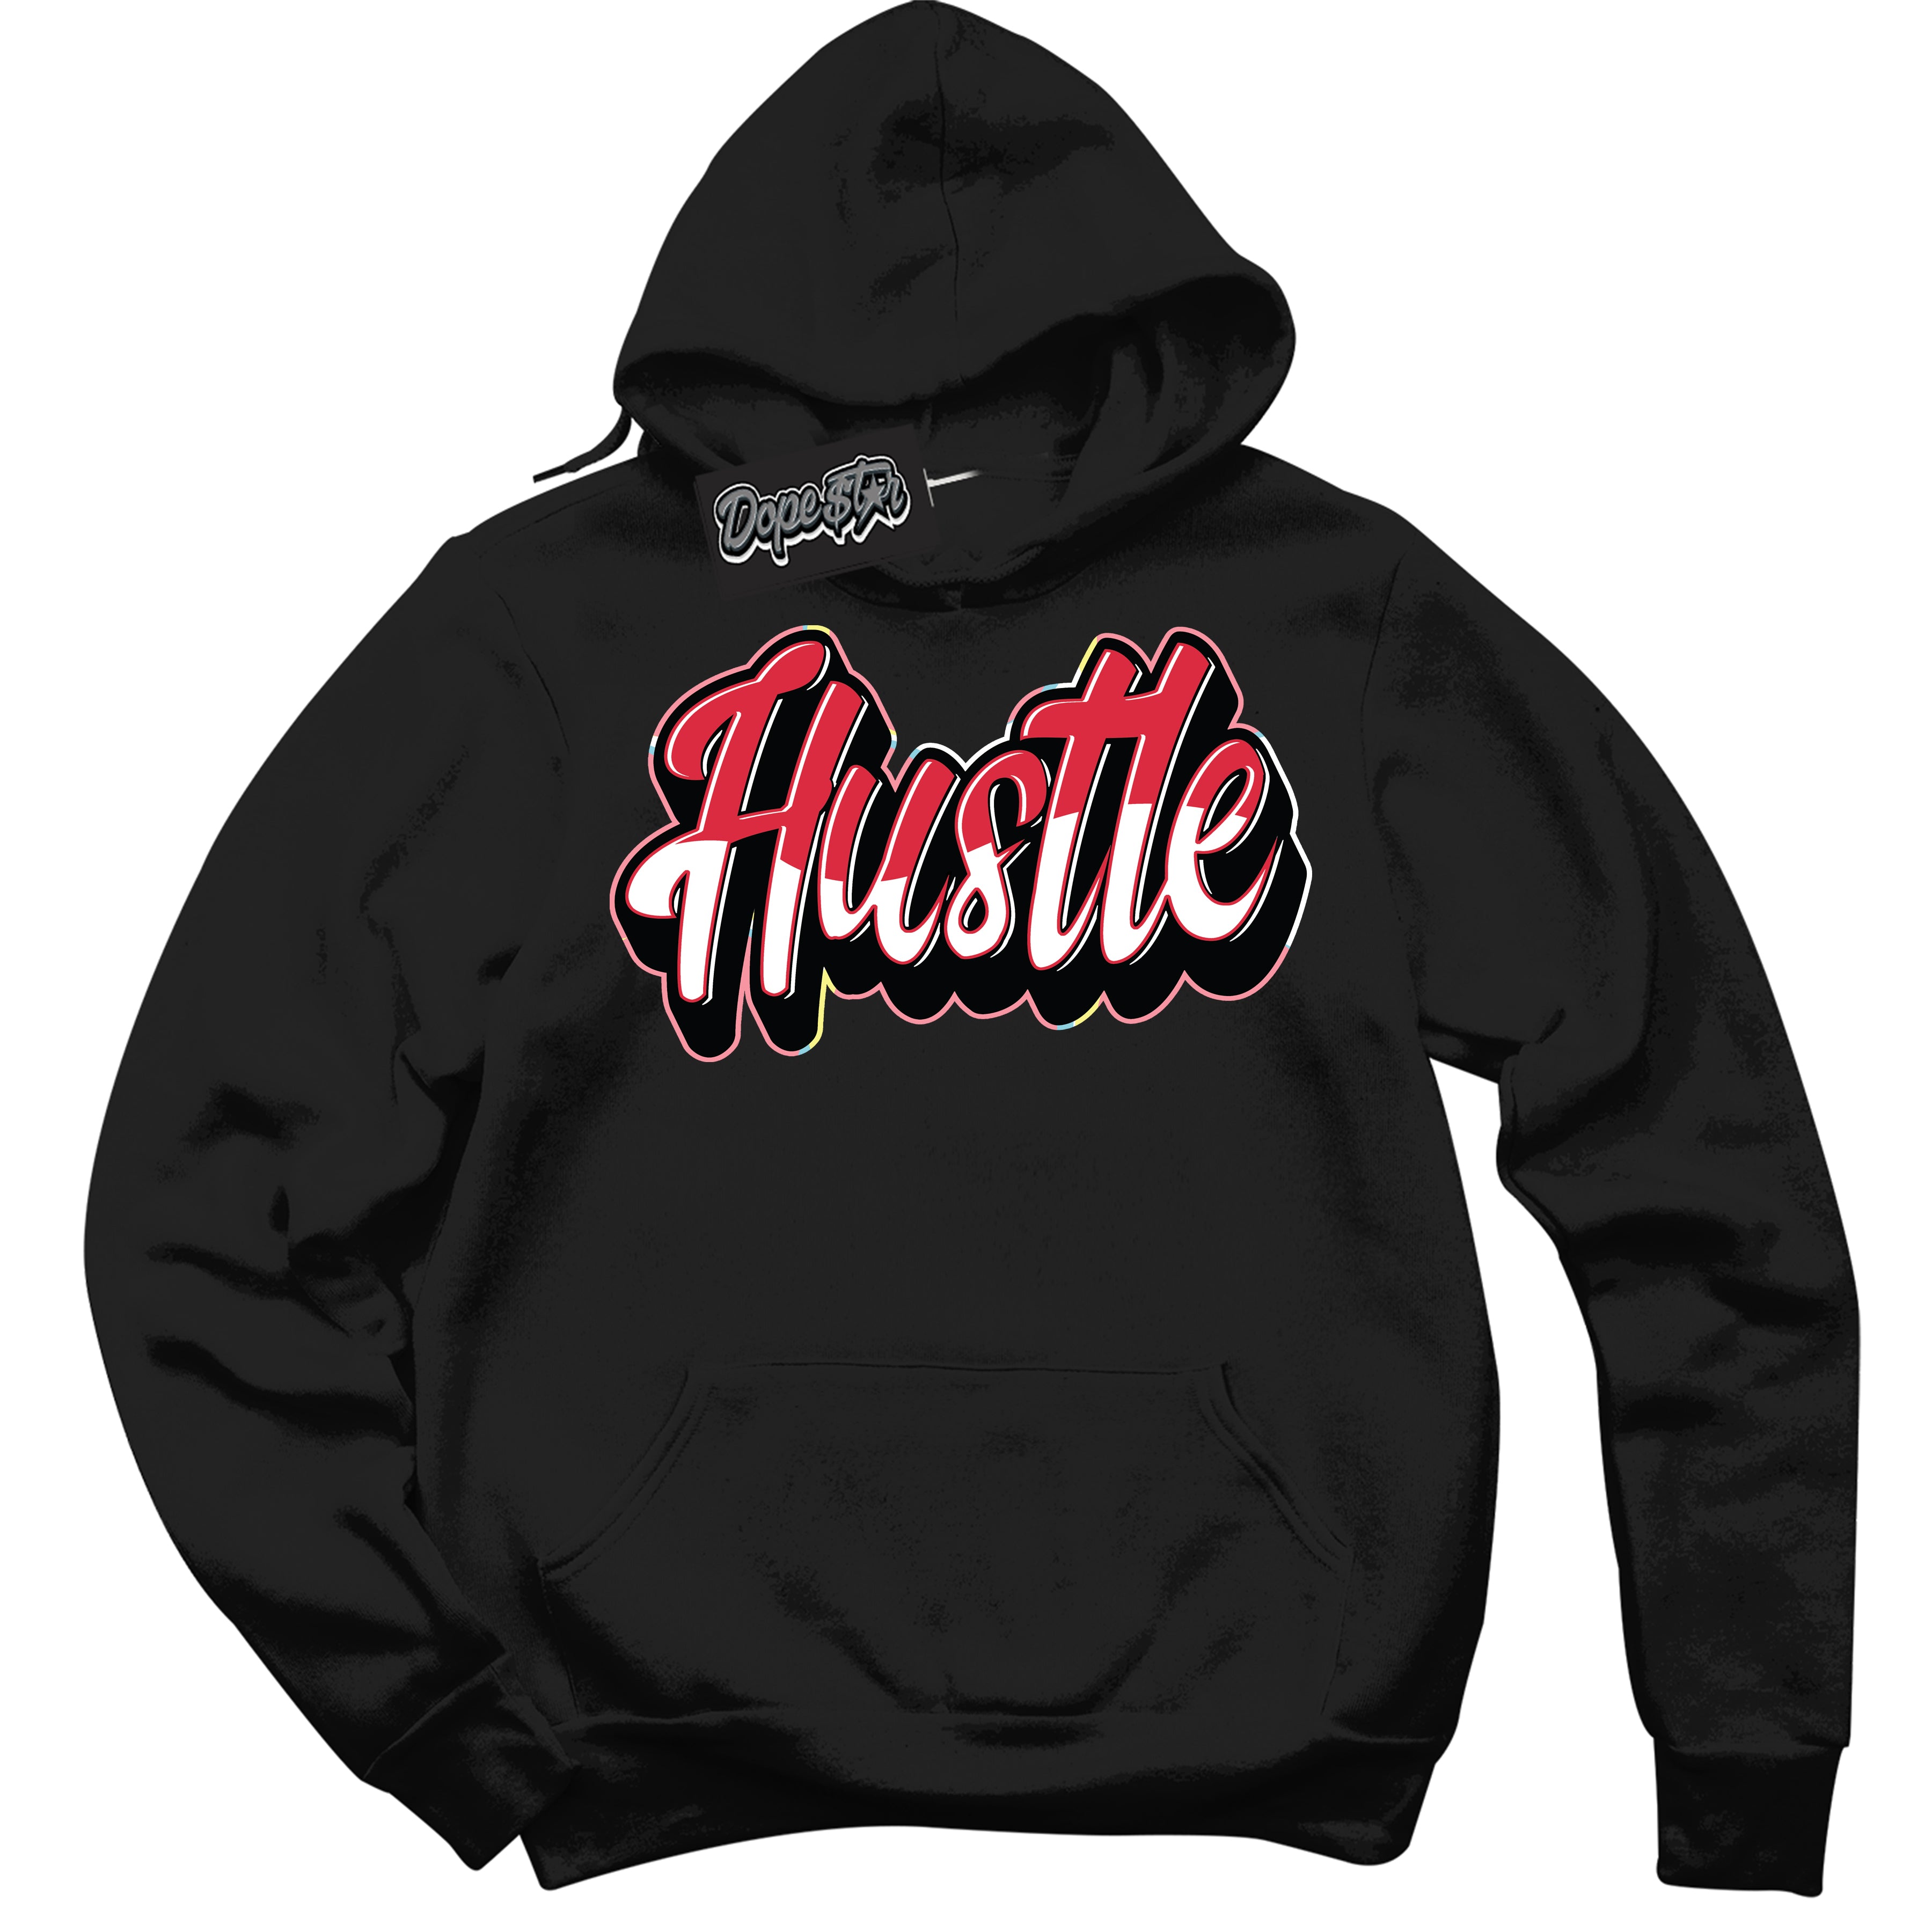 Cool Black Graphic DopeStar Hoodie with “ Hustle “ print, that perfectly matches Spider-Verse 1s sneakers